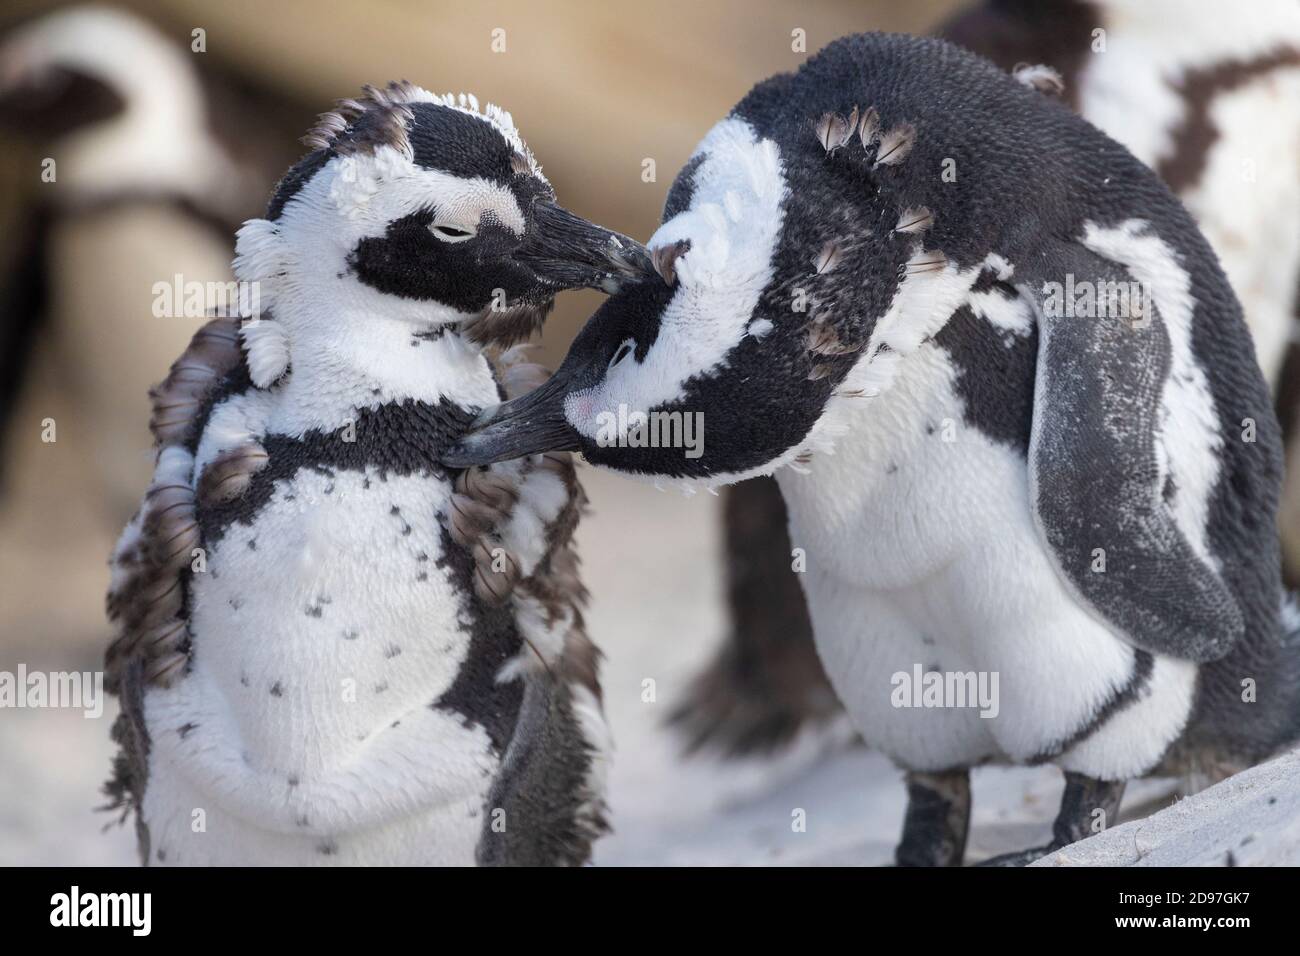 African penguin (Spheniscus demersus), two individuals preening each other, Western Cape, South Africa Stock Photo